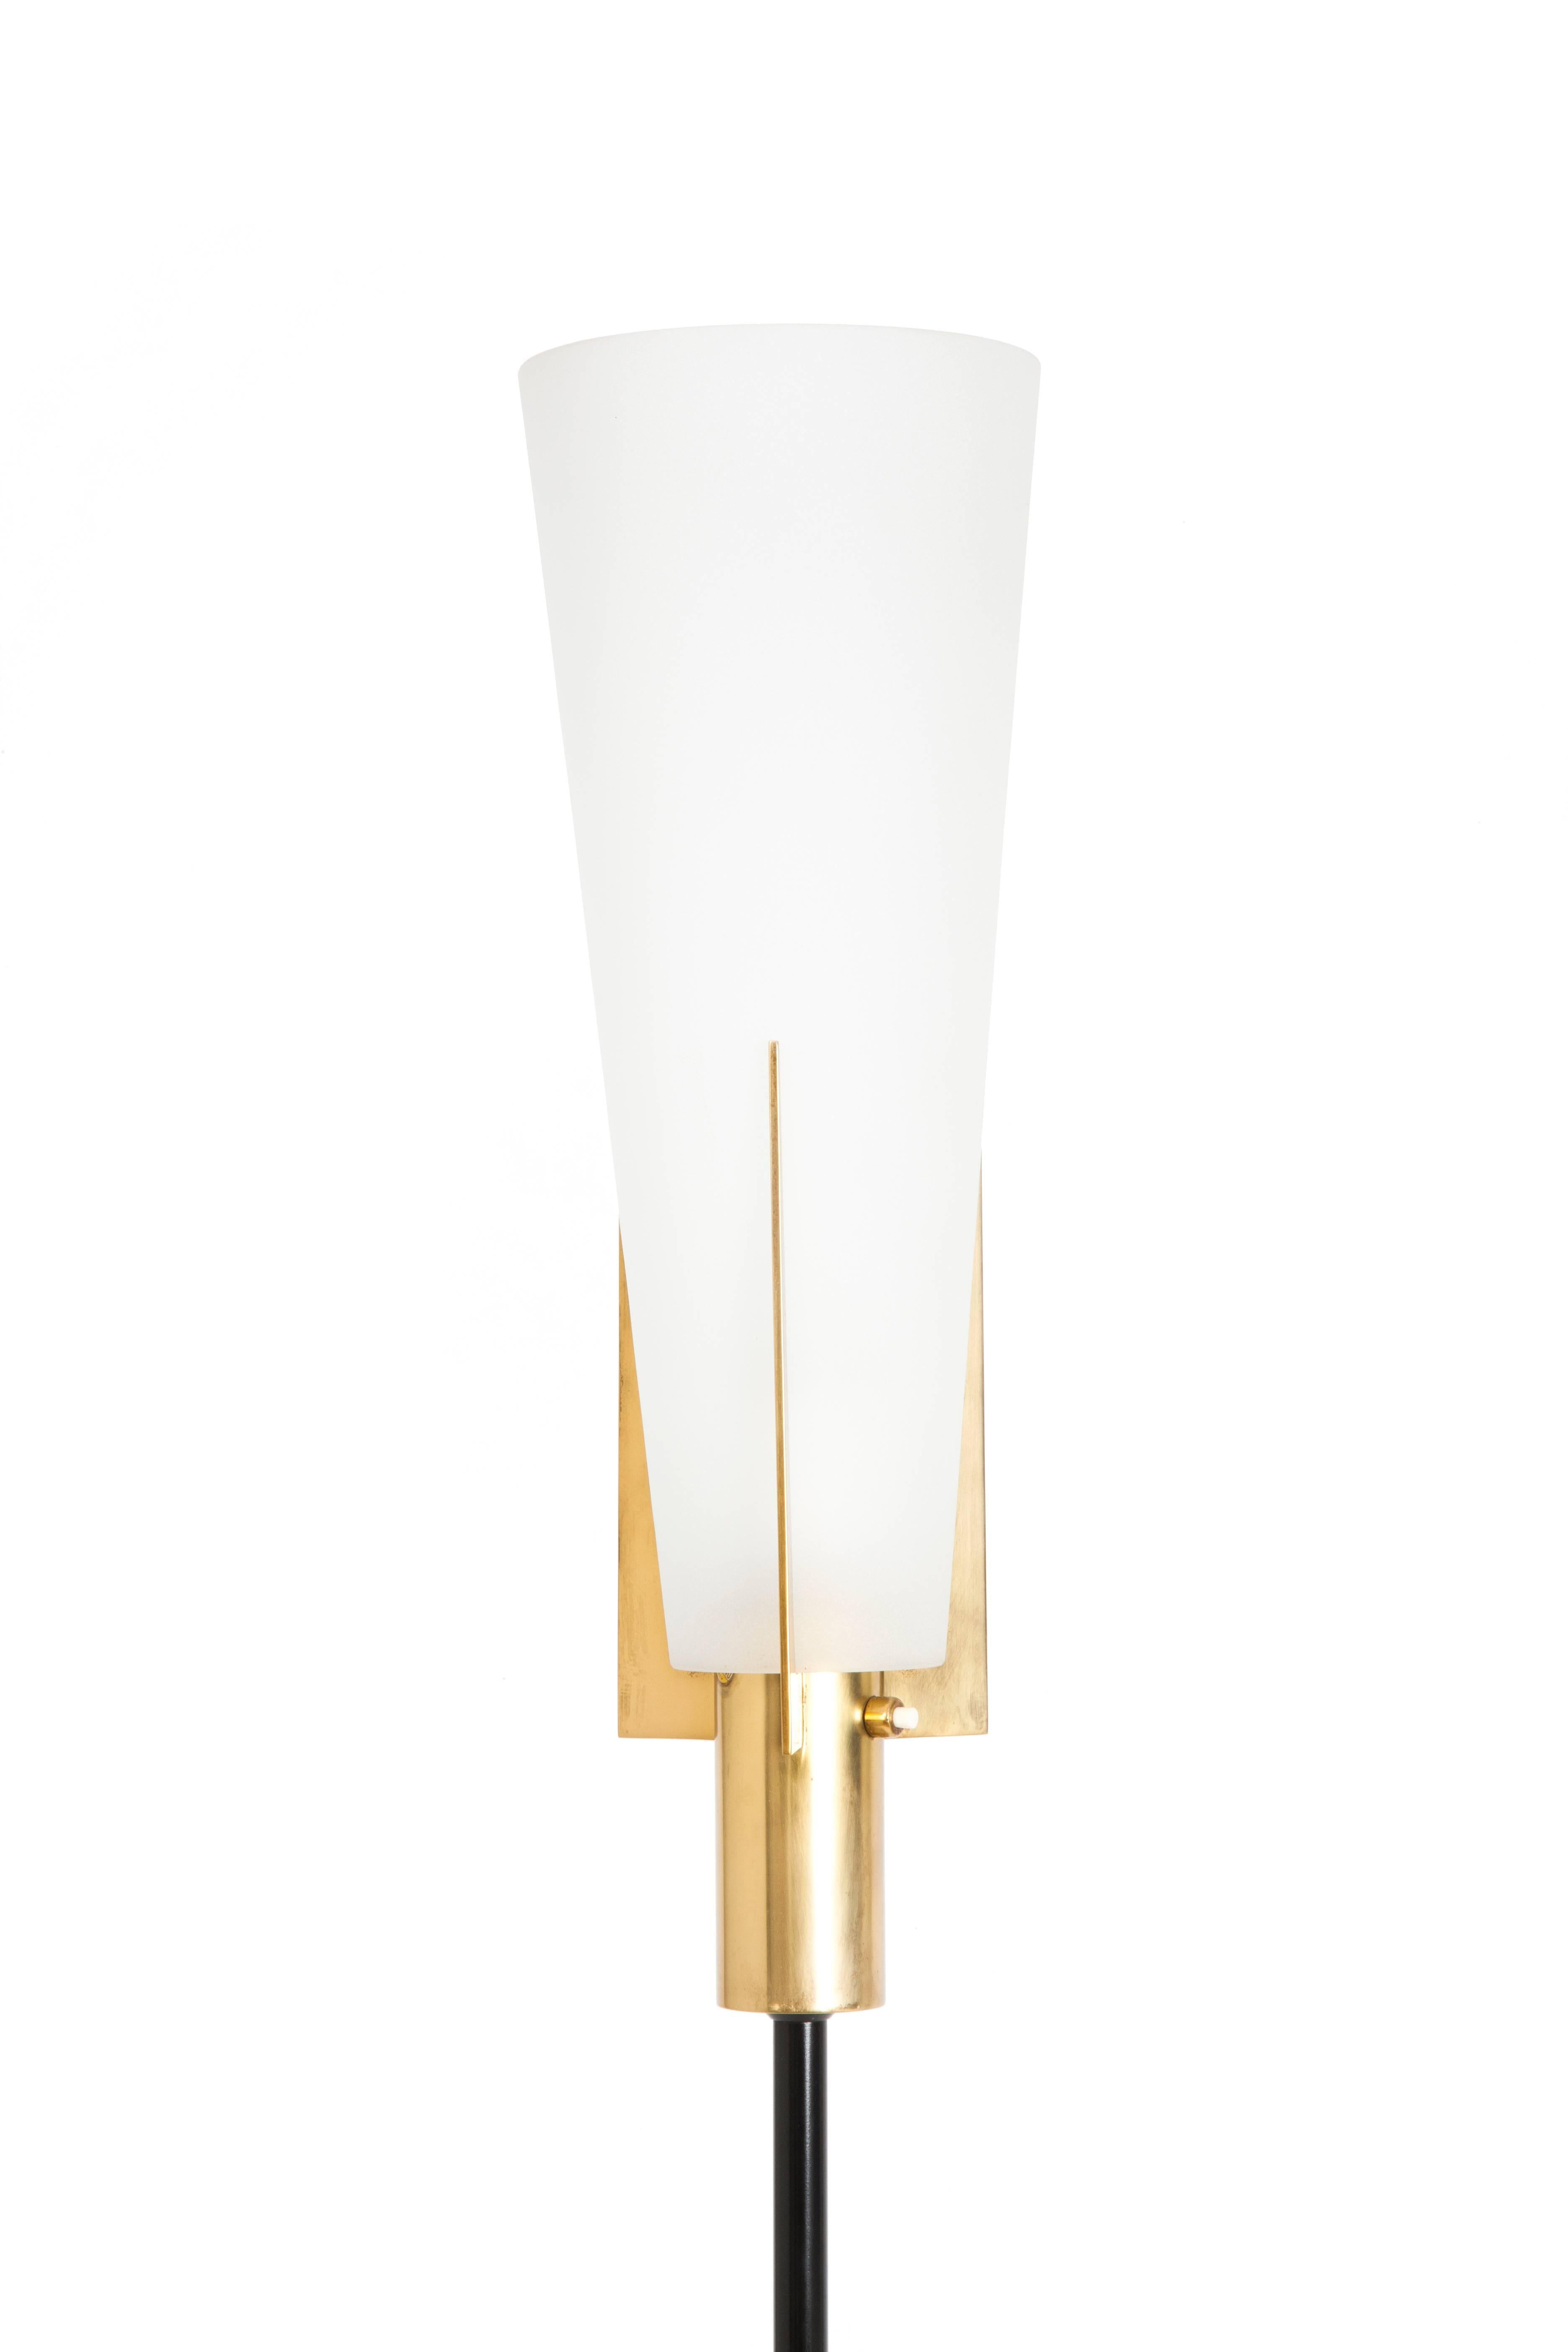 Floor lamp by Stilnovo in brass, enamelled brass, marble and glass,
Italy, 1950s.